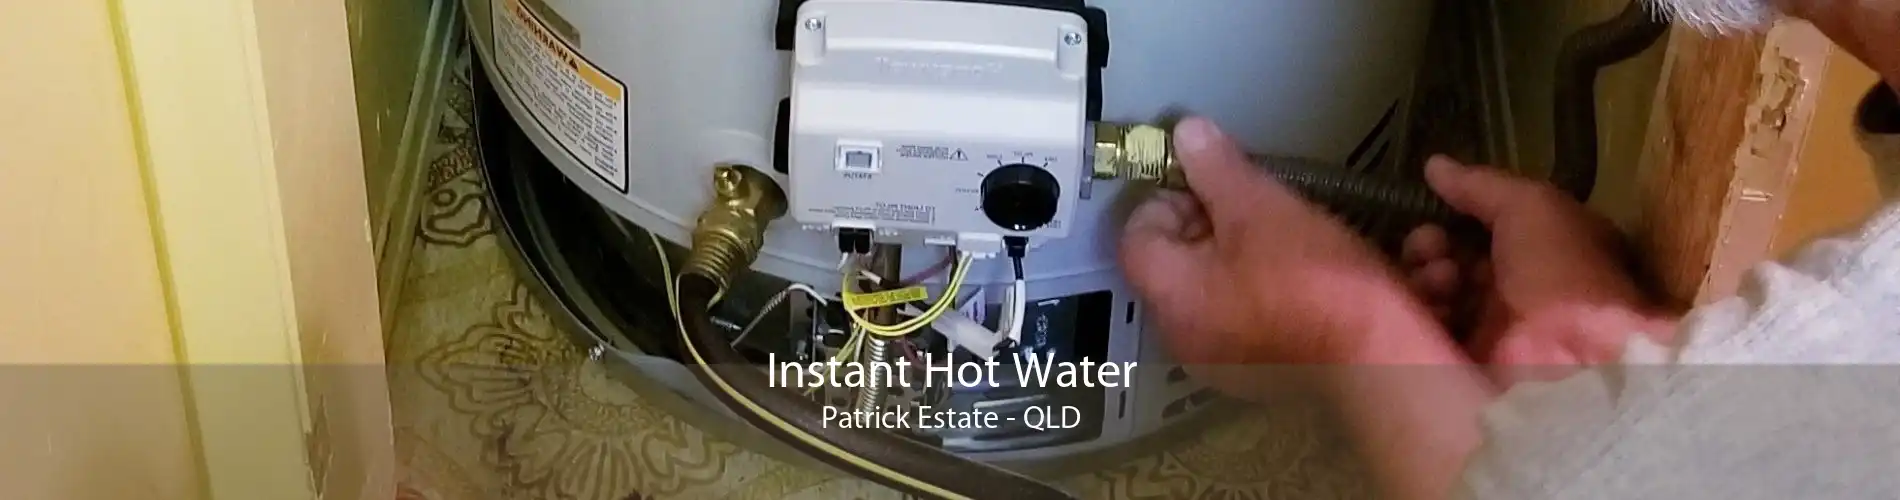 Instant Hot Water Patrick Estate - QLD